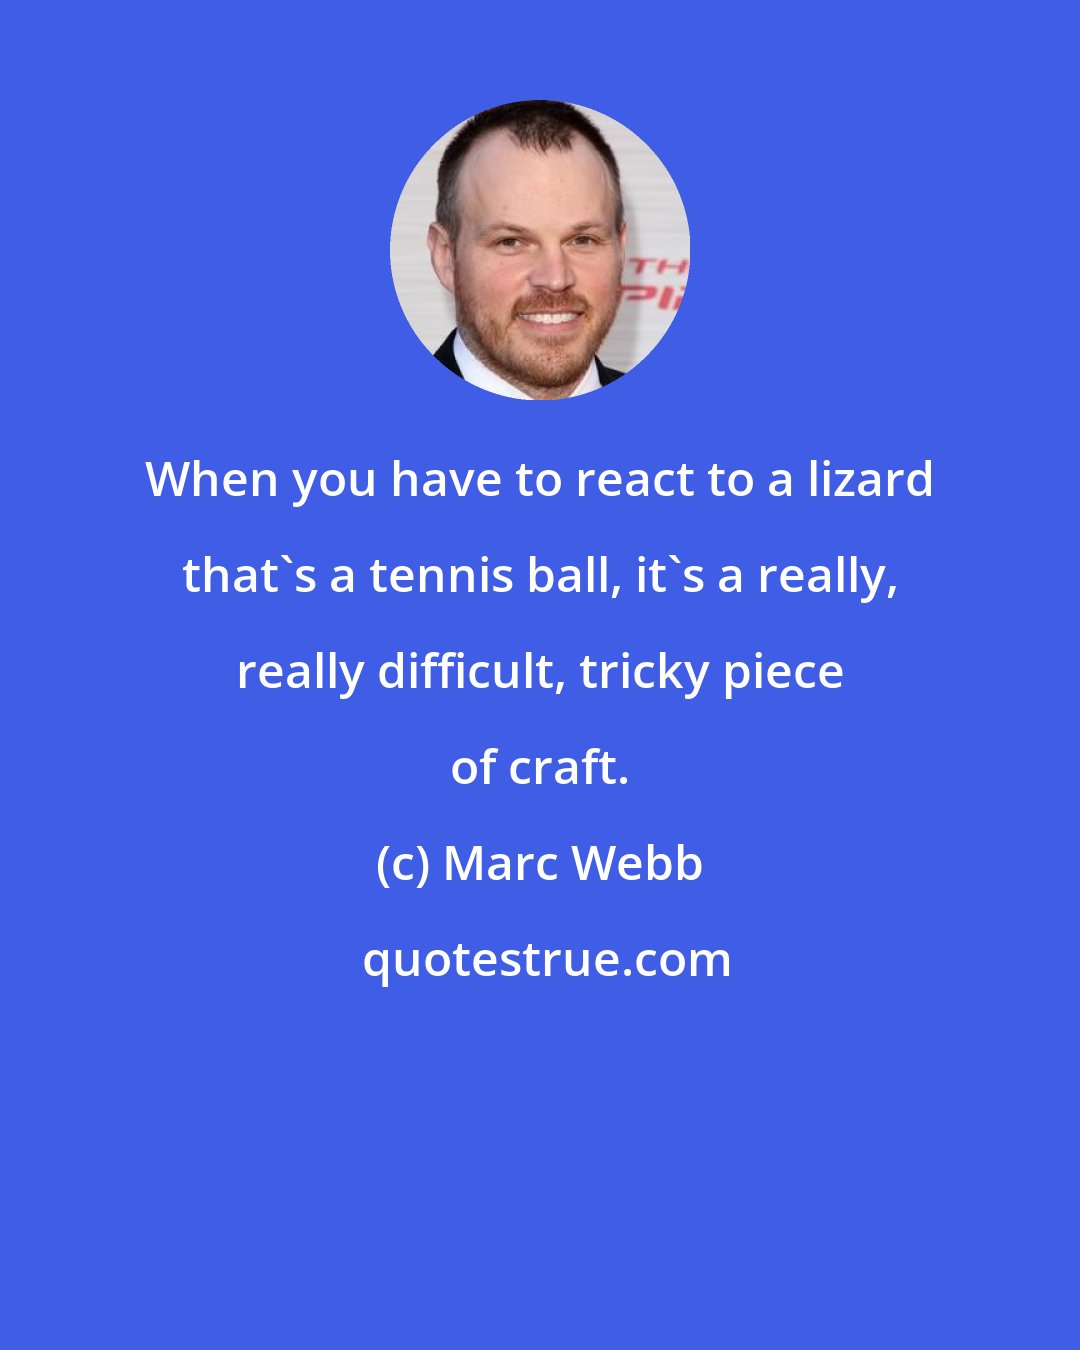 Marc Webb: When you have to react to a lizard that's a tennis ball, it's a really, really difficult, tricky piece of craft.